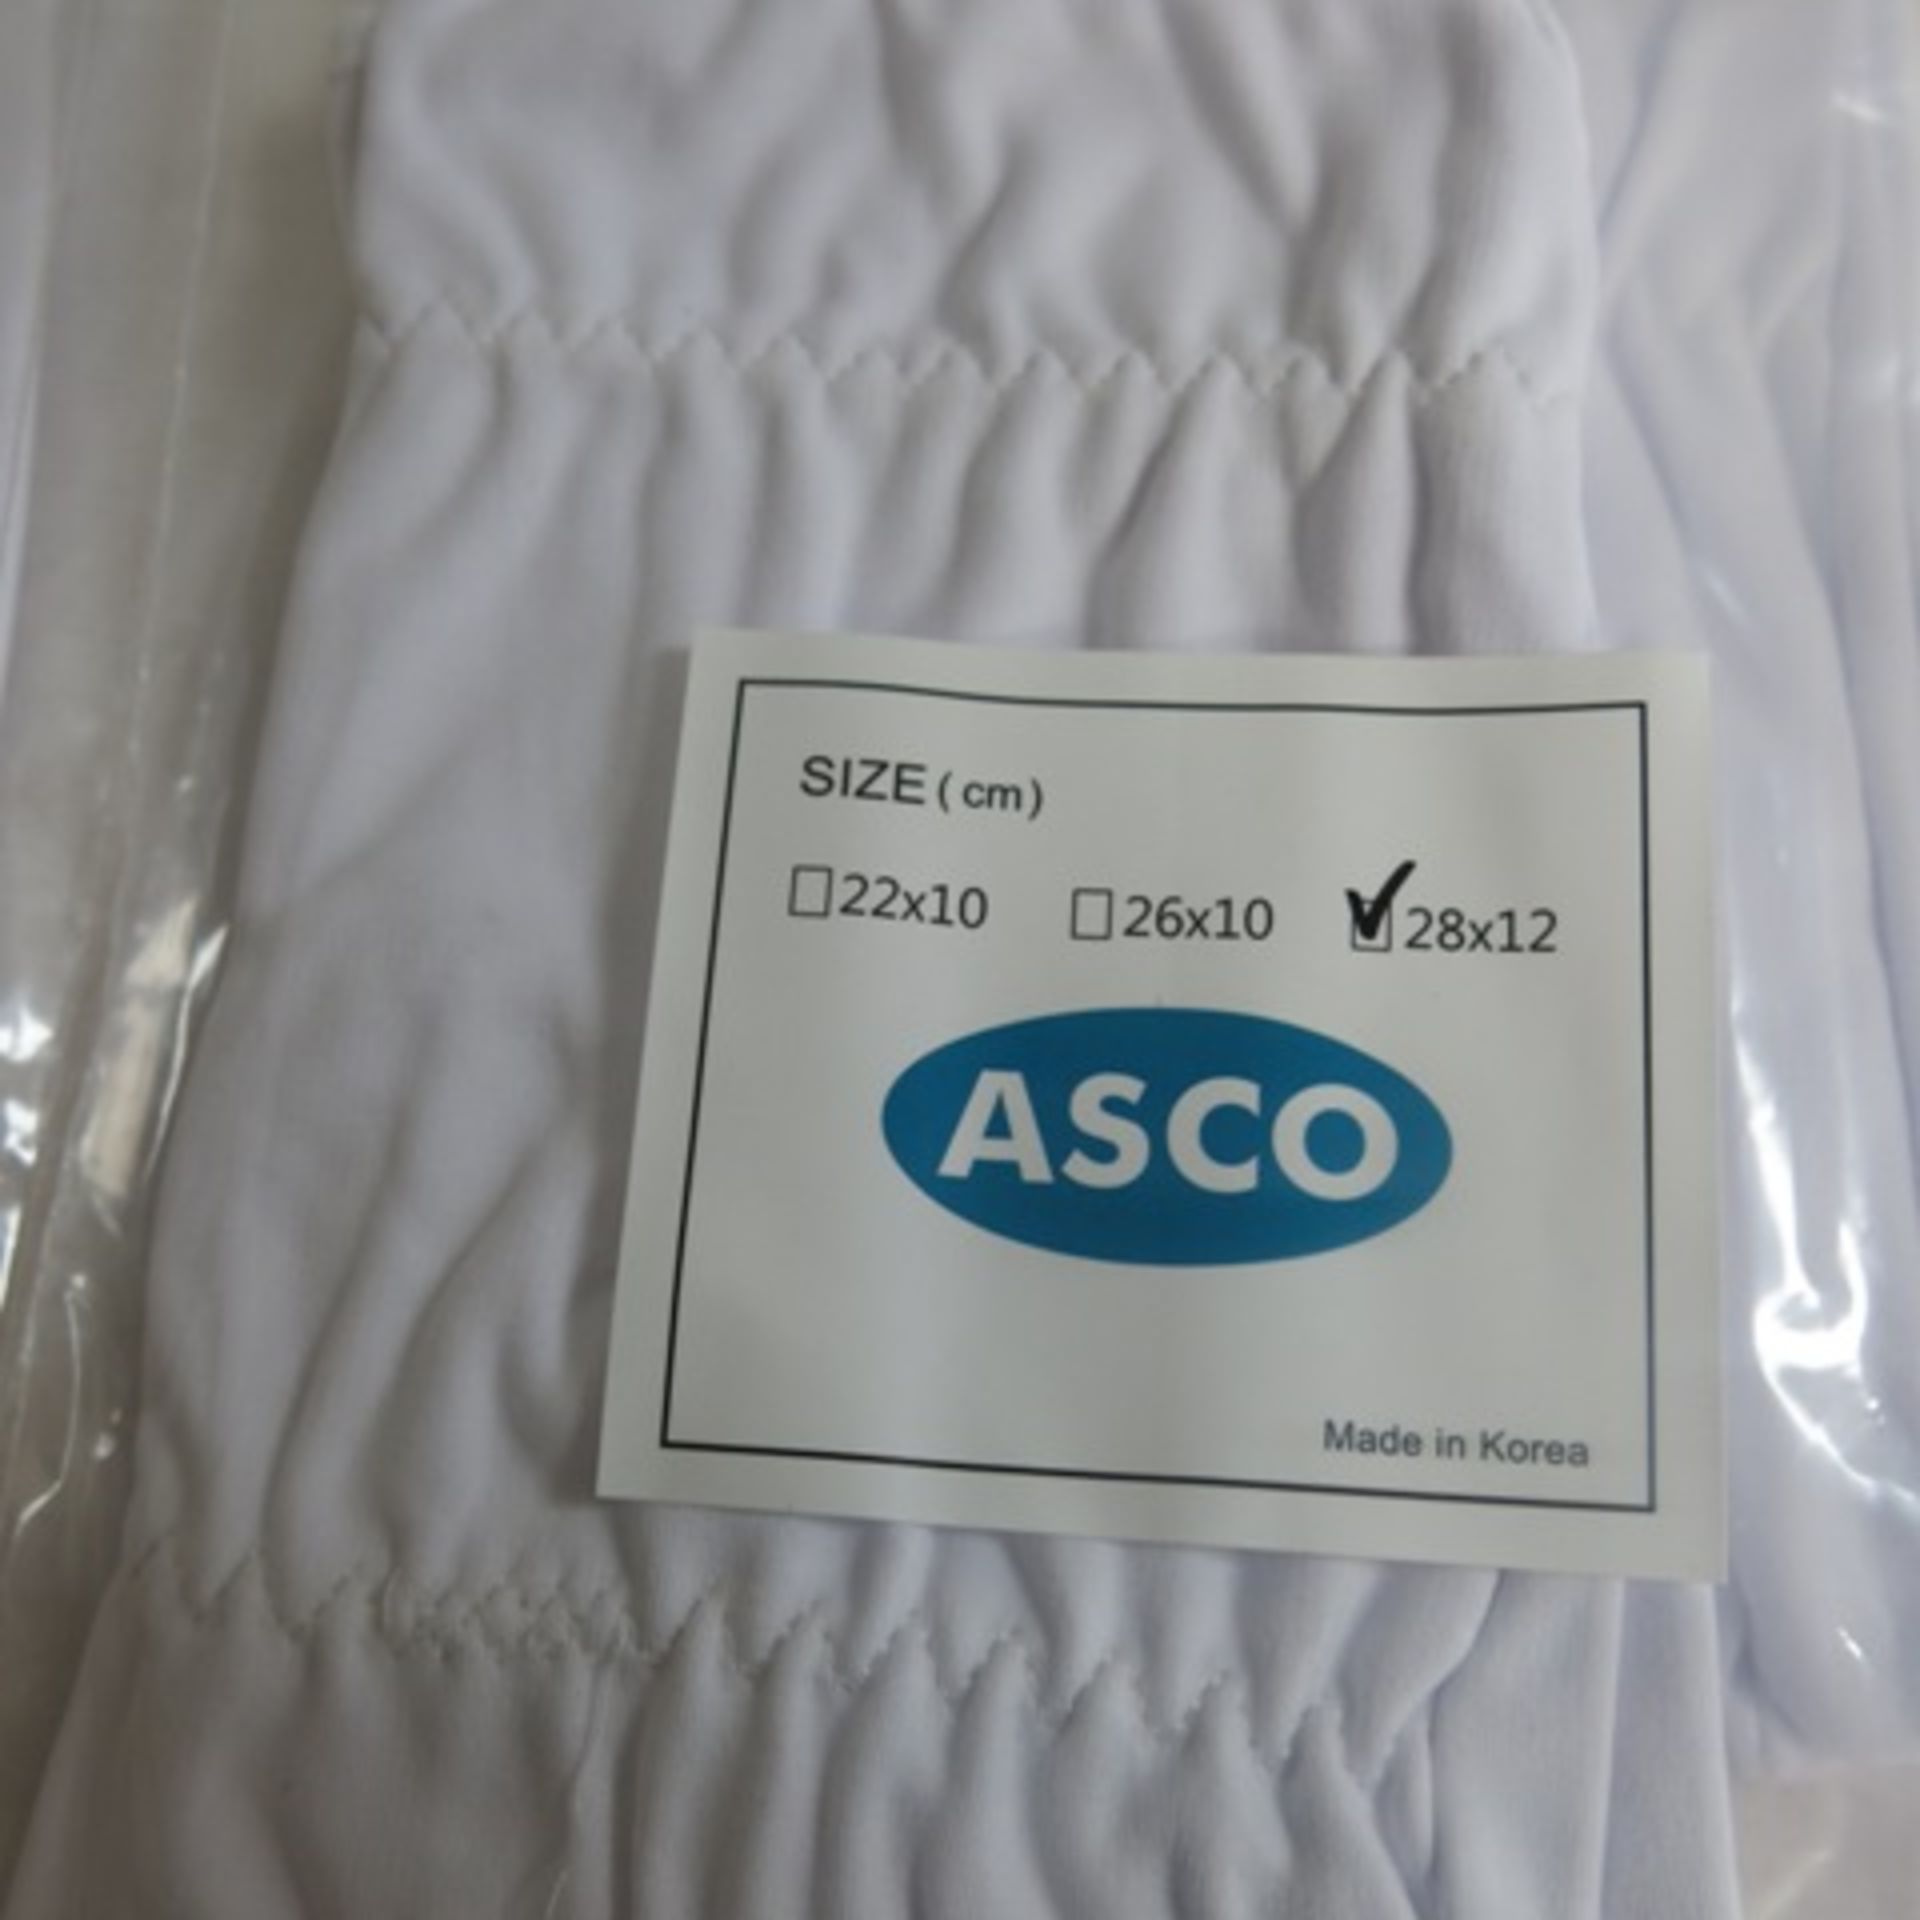 6 x New/Packaged Pairs or Asco Handling Gloves. Size 28 x 12cm. - Image 2 of 2